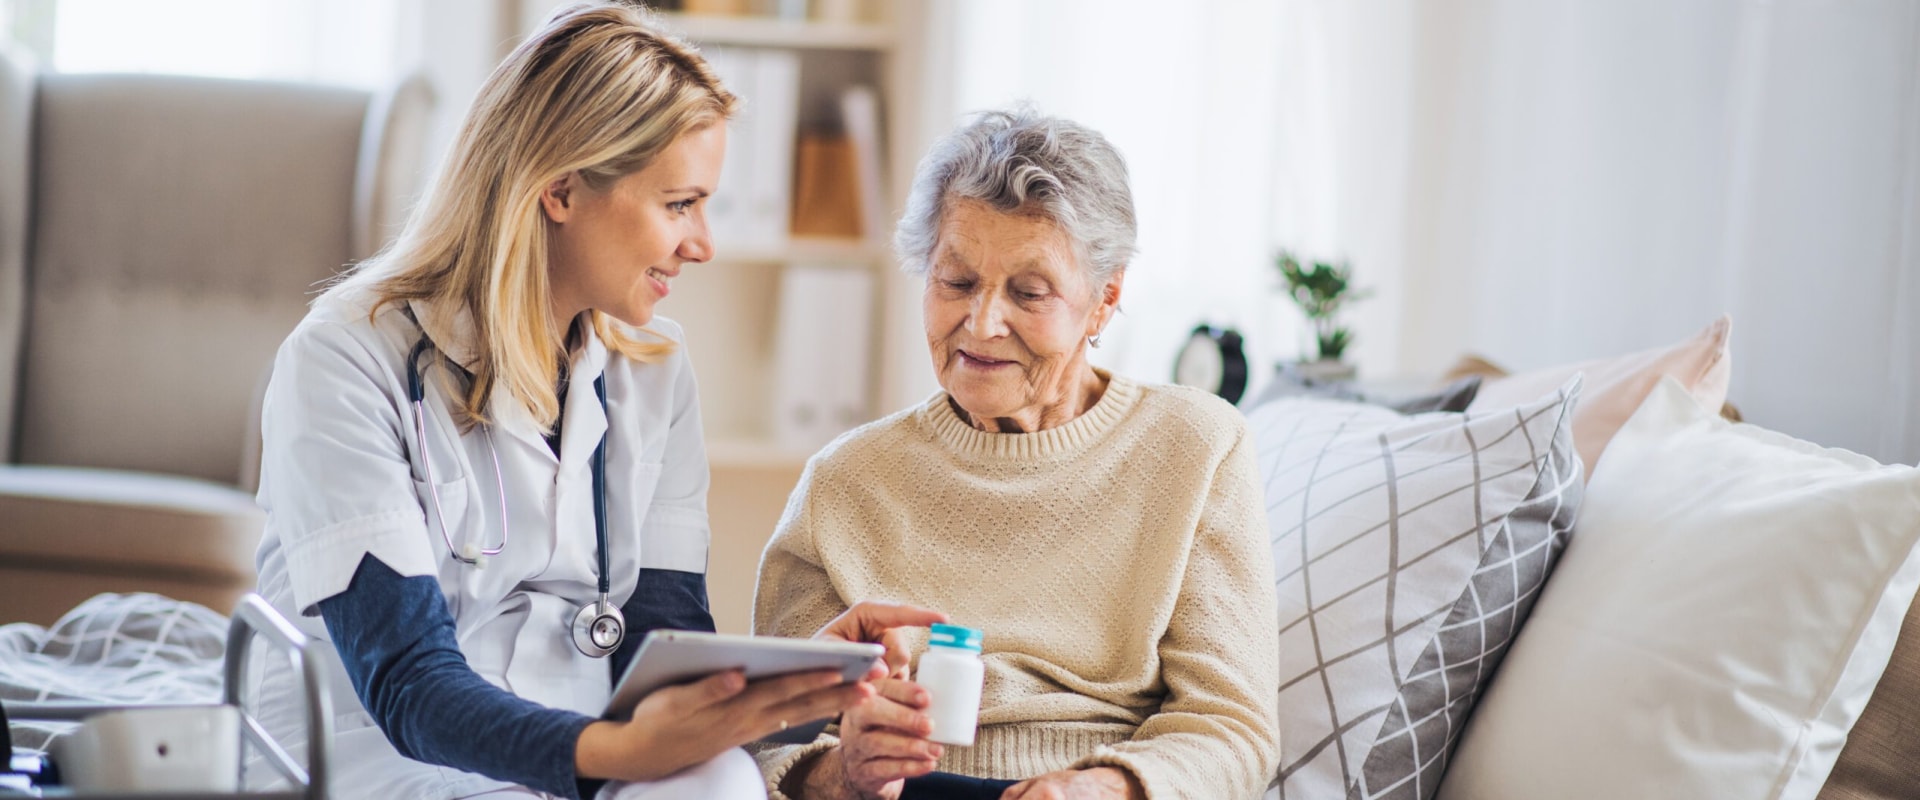 Home Health Care Services for Caregivers in Orange County: Get the Best Care for Your Loved Ones